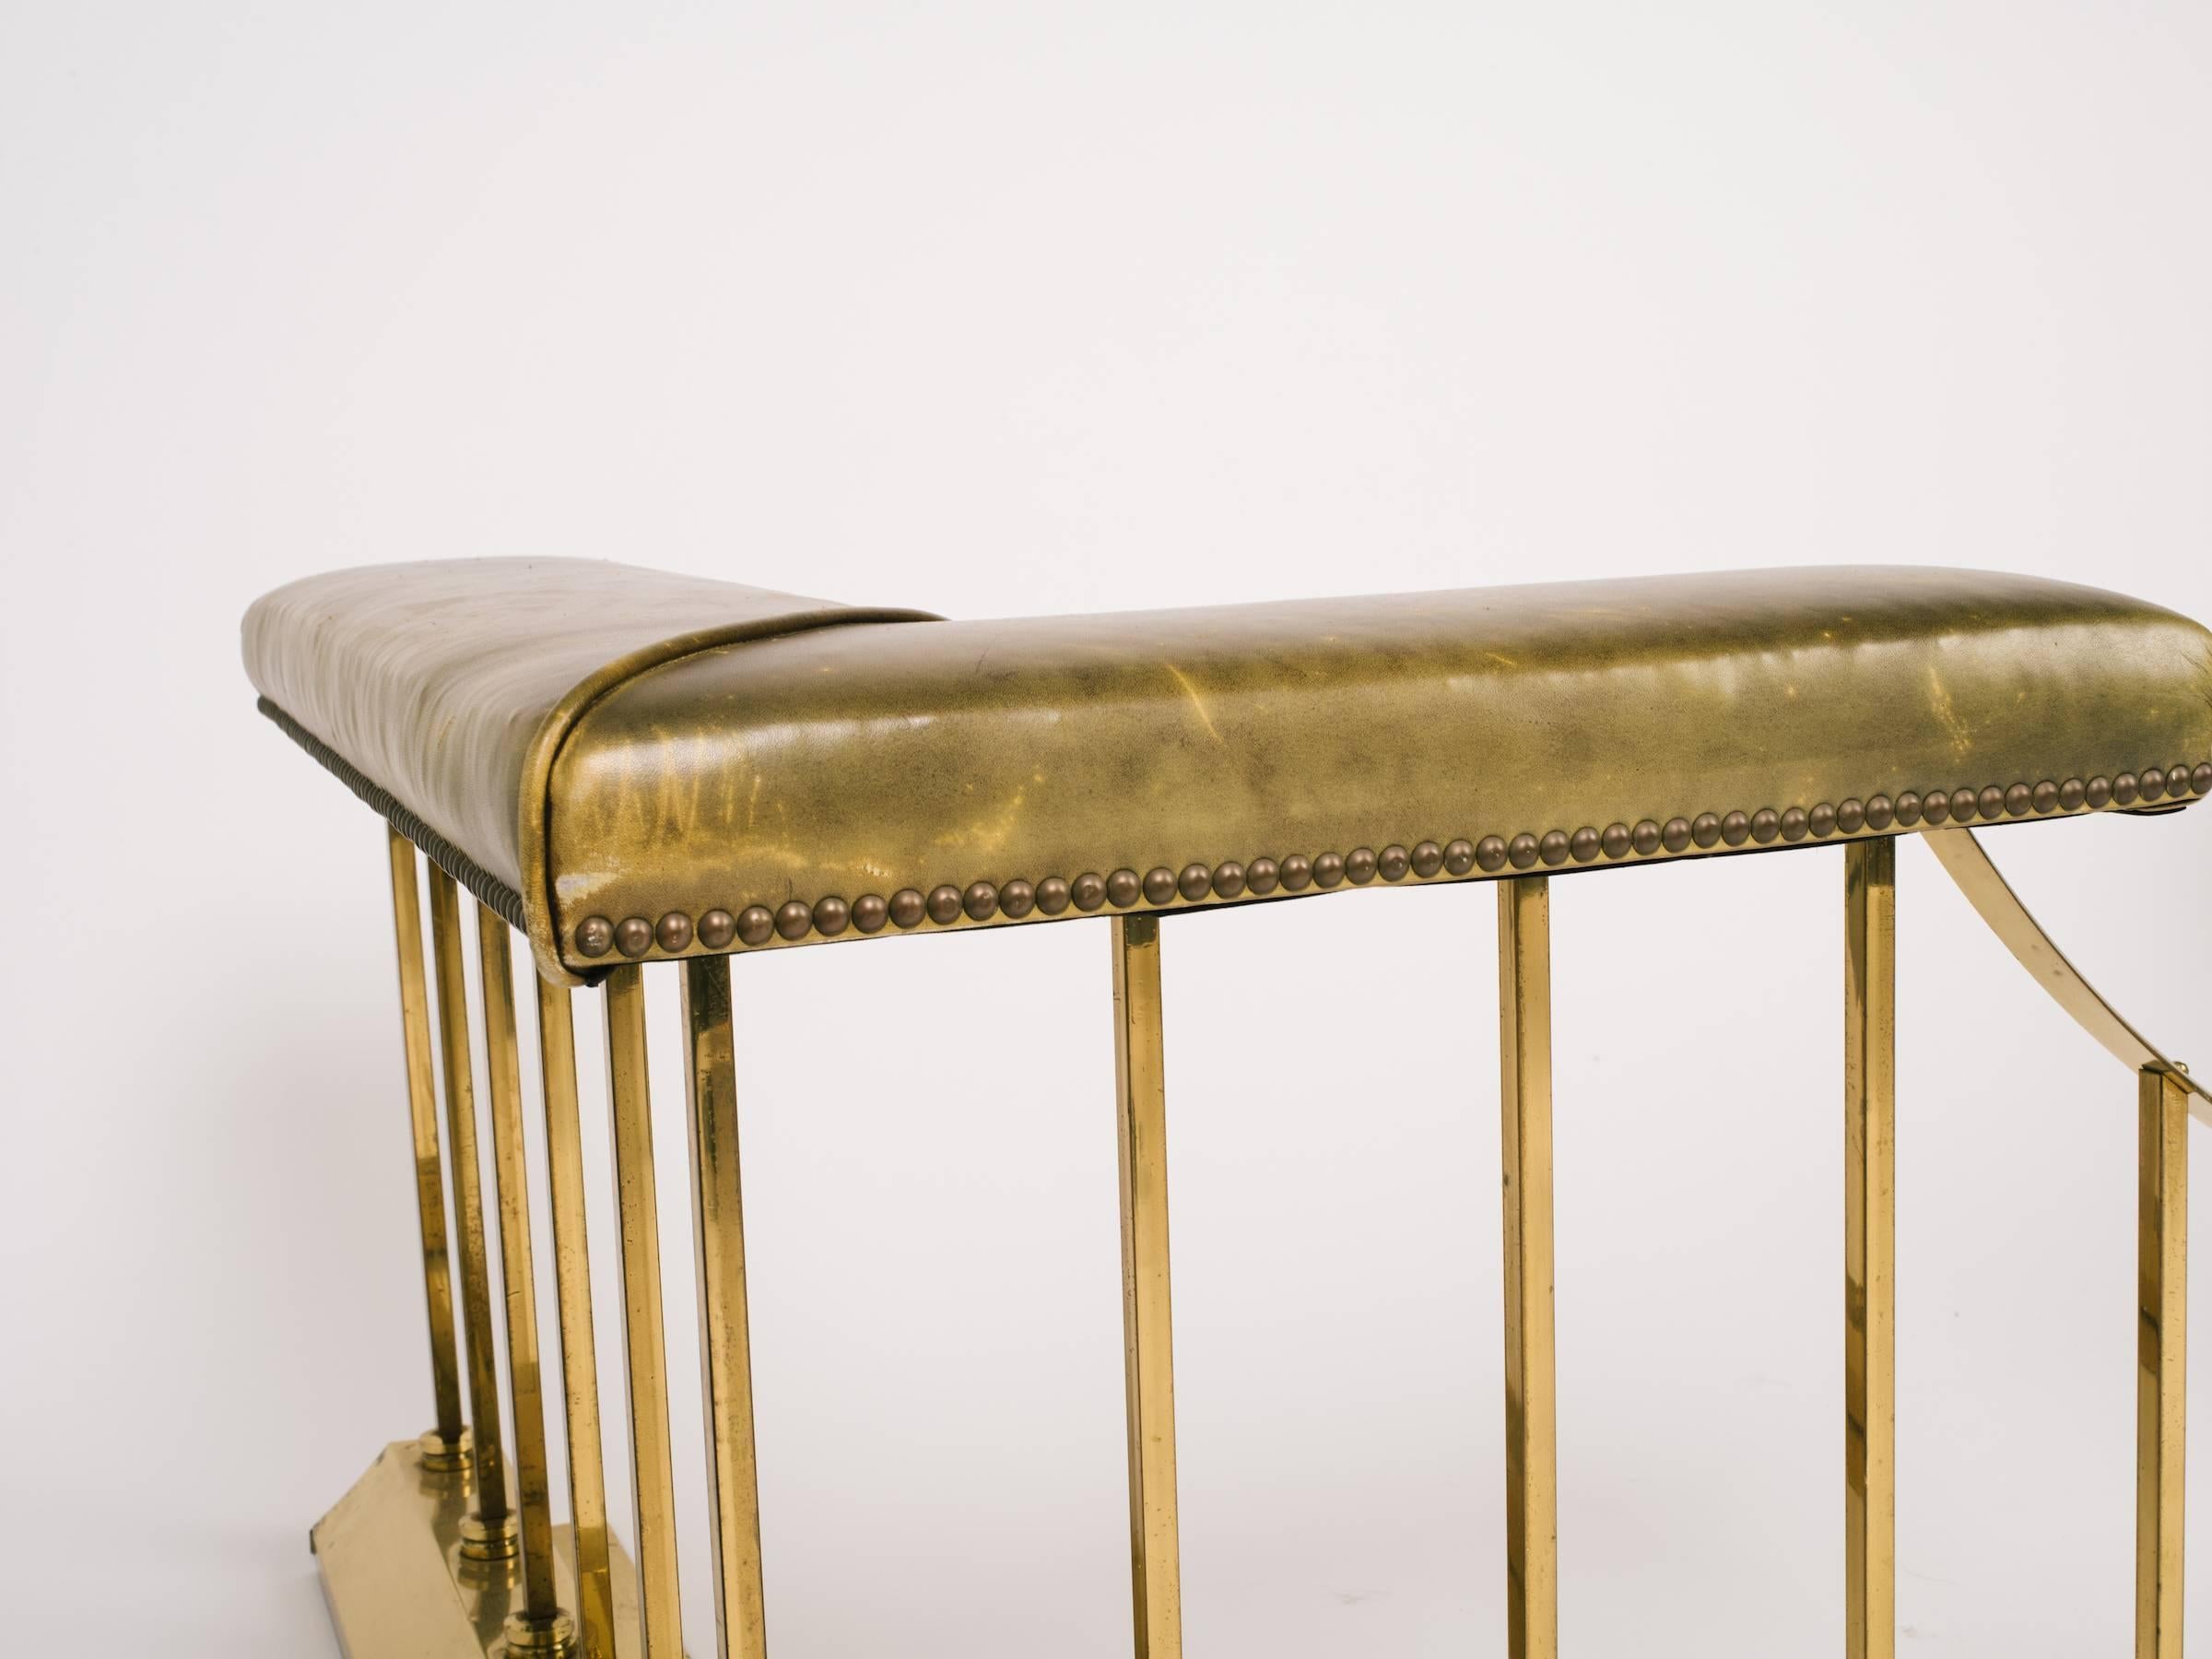 1880s English Brass and Leather Fire Place Fender Bench 2